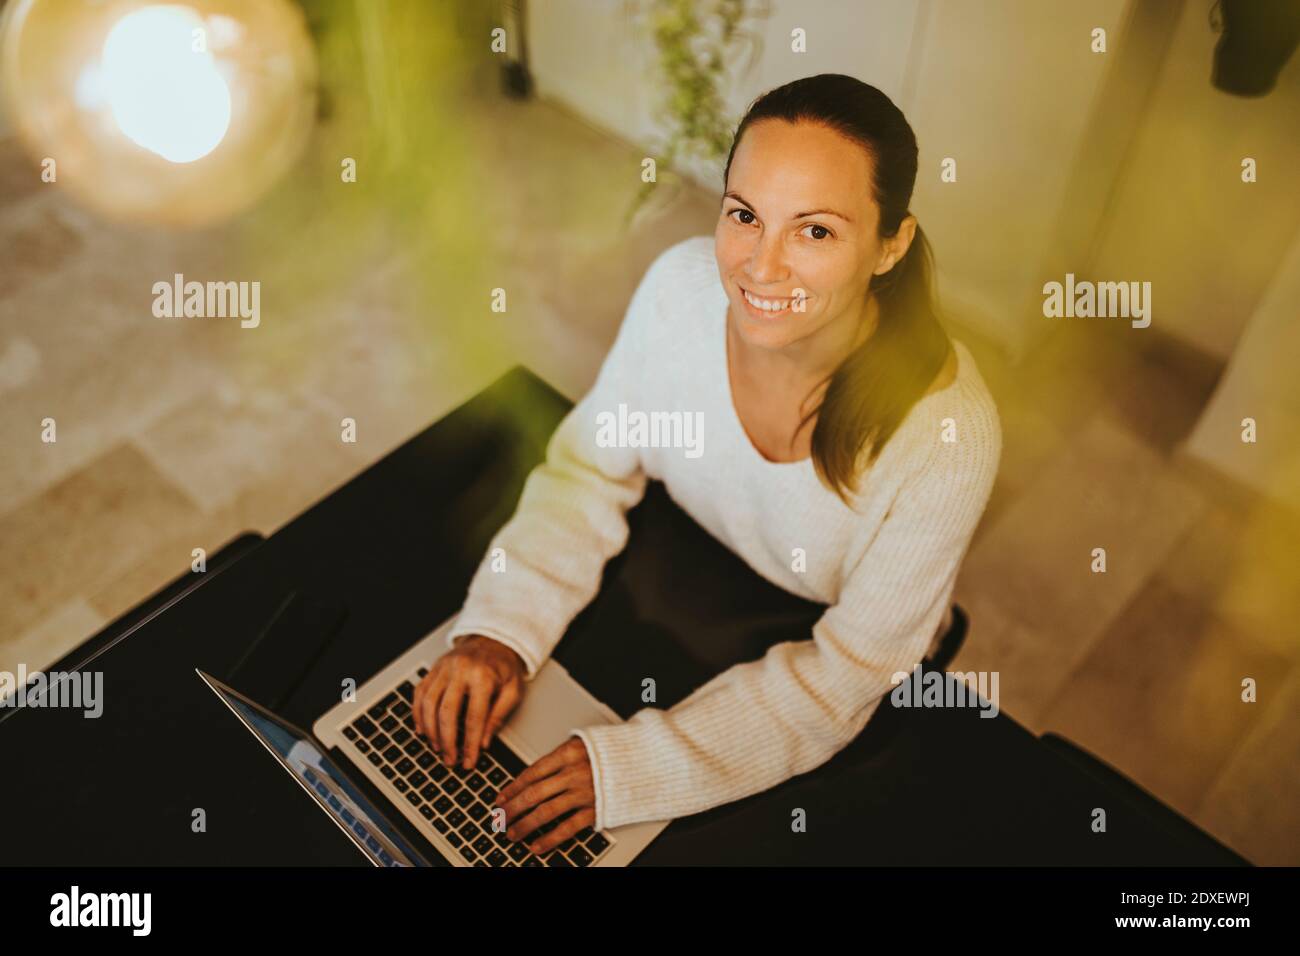 Smiling woman sitting with laptop at kitchen island Stock Photo